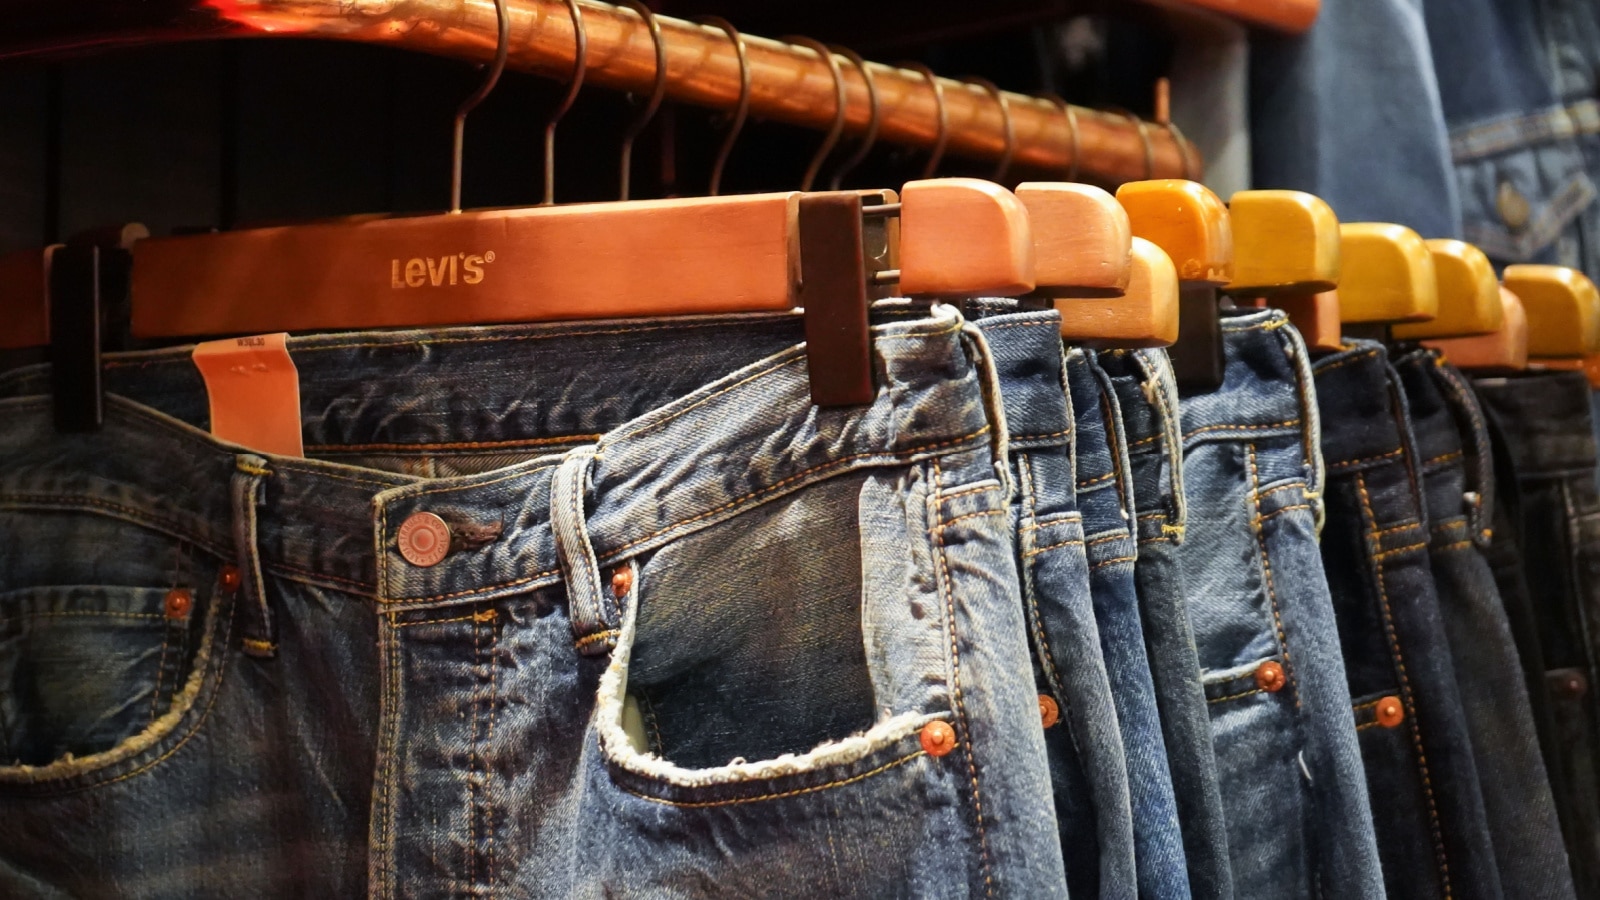 Bangkok, Thailand - August 10, 2018 : Levi's blue jeans hang on a shelf in A Levi’s Store. Levi Strauss is one of the world's oldest and most well known jeans manufacturers.